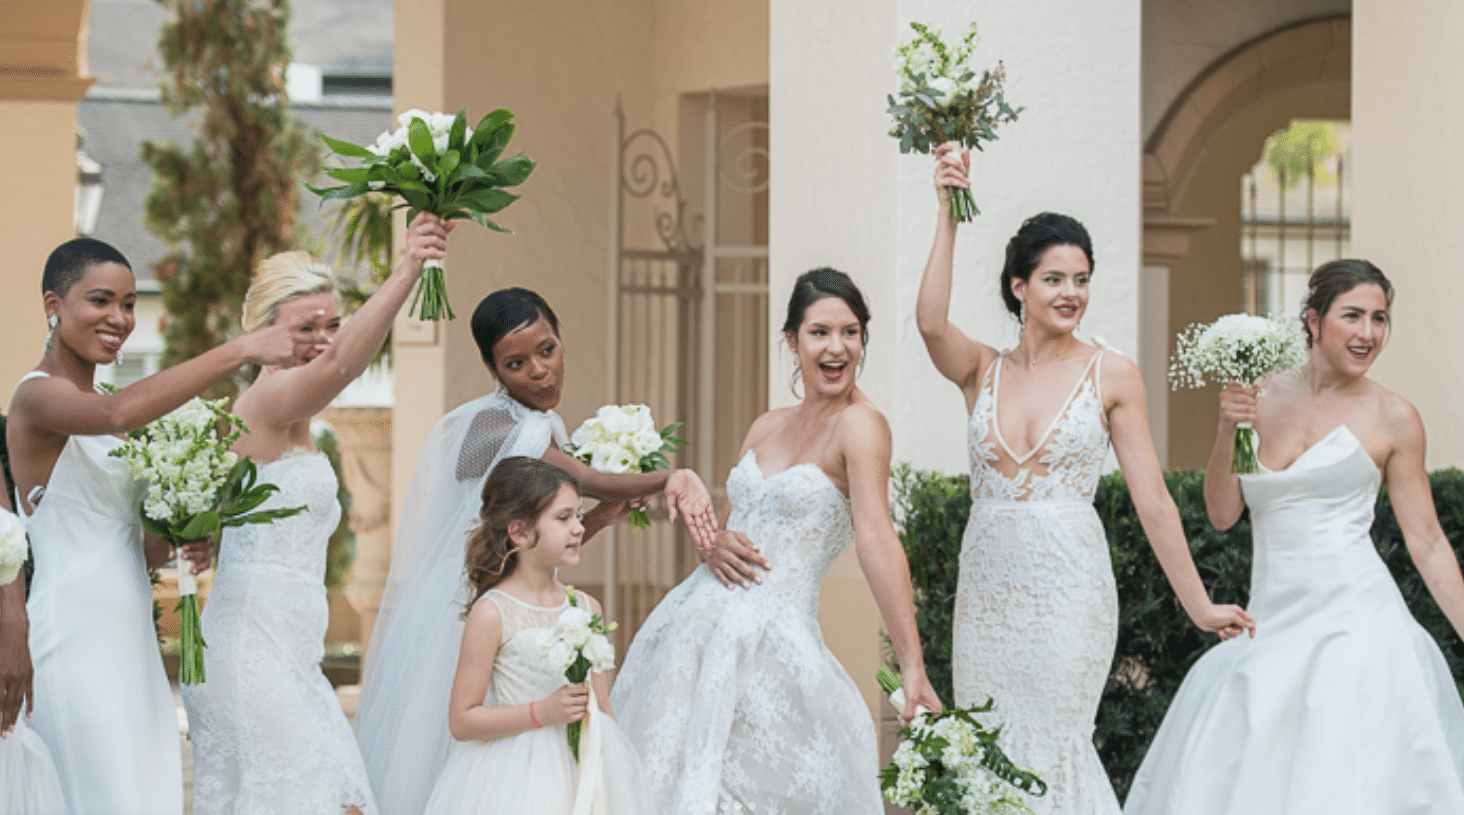 6 women in bridal dresses pictured with one flower girl